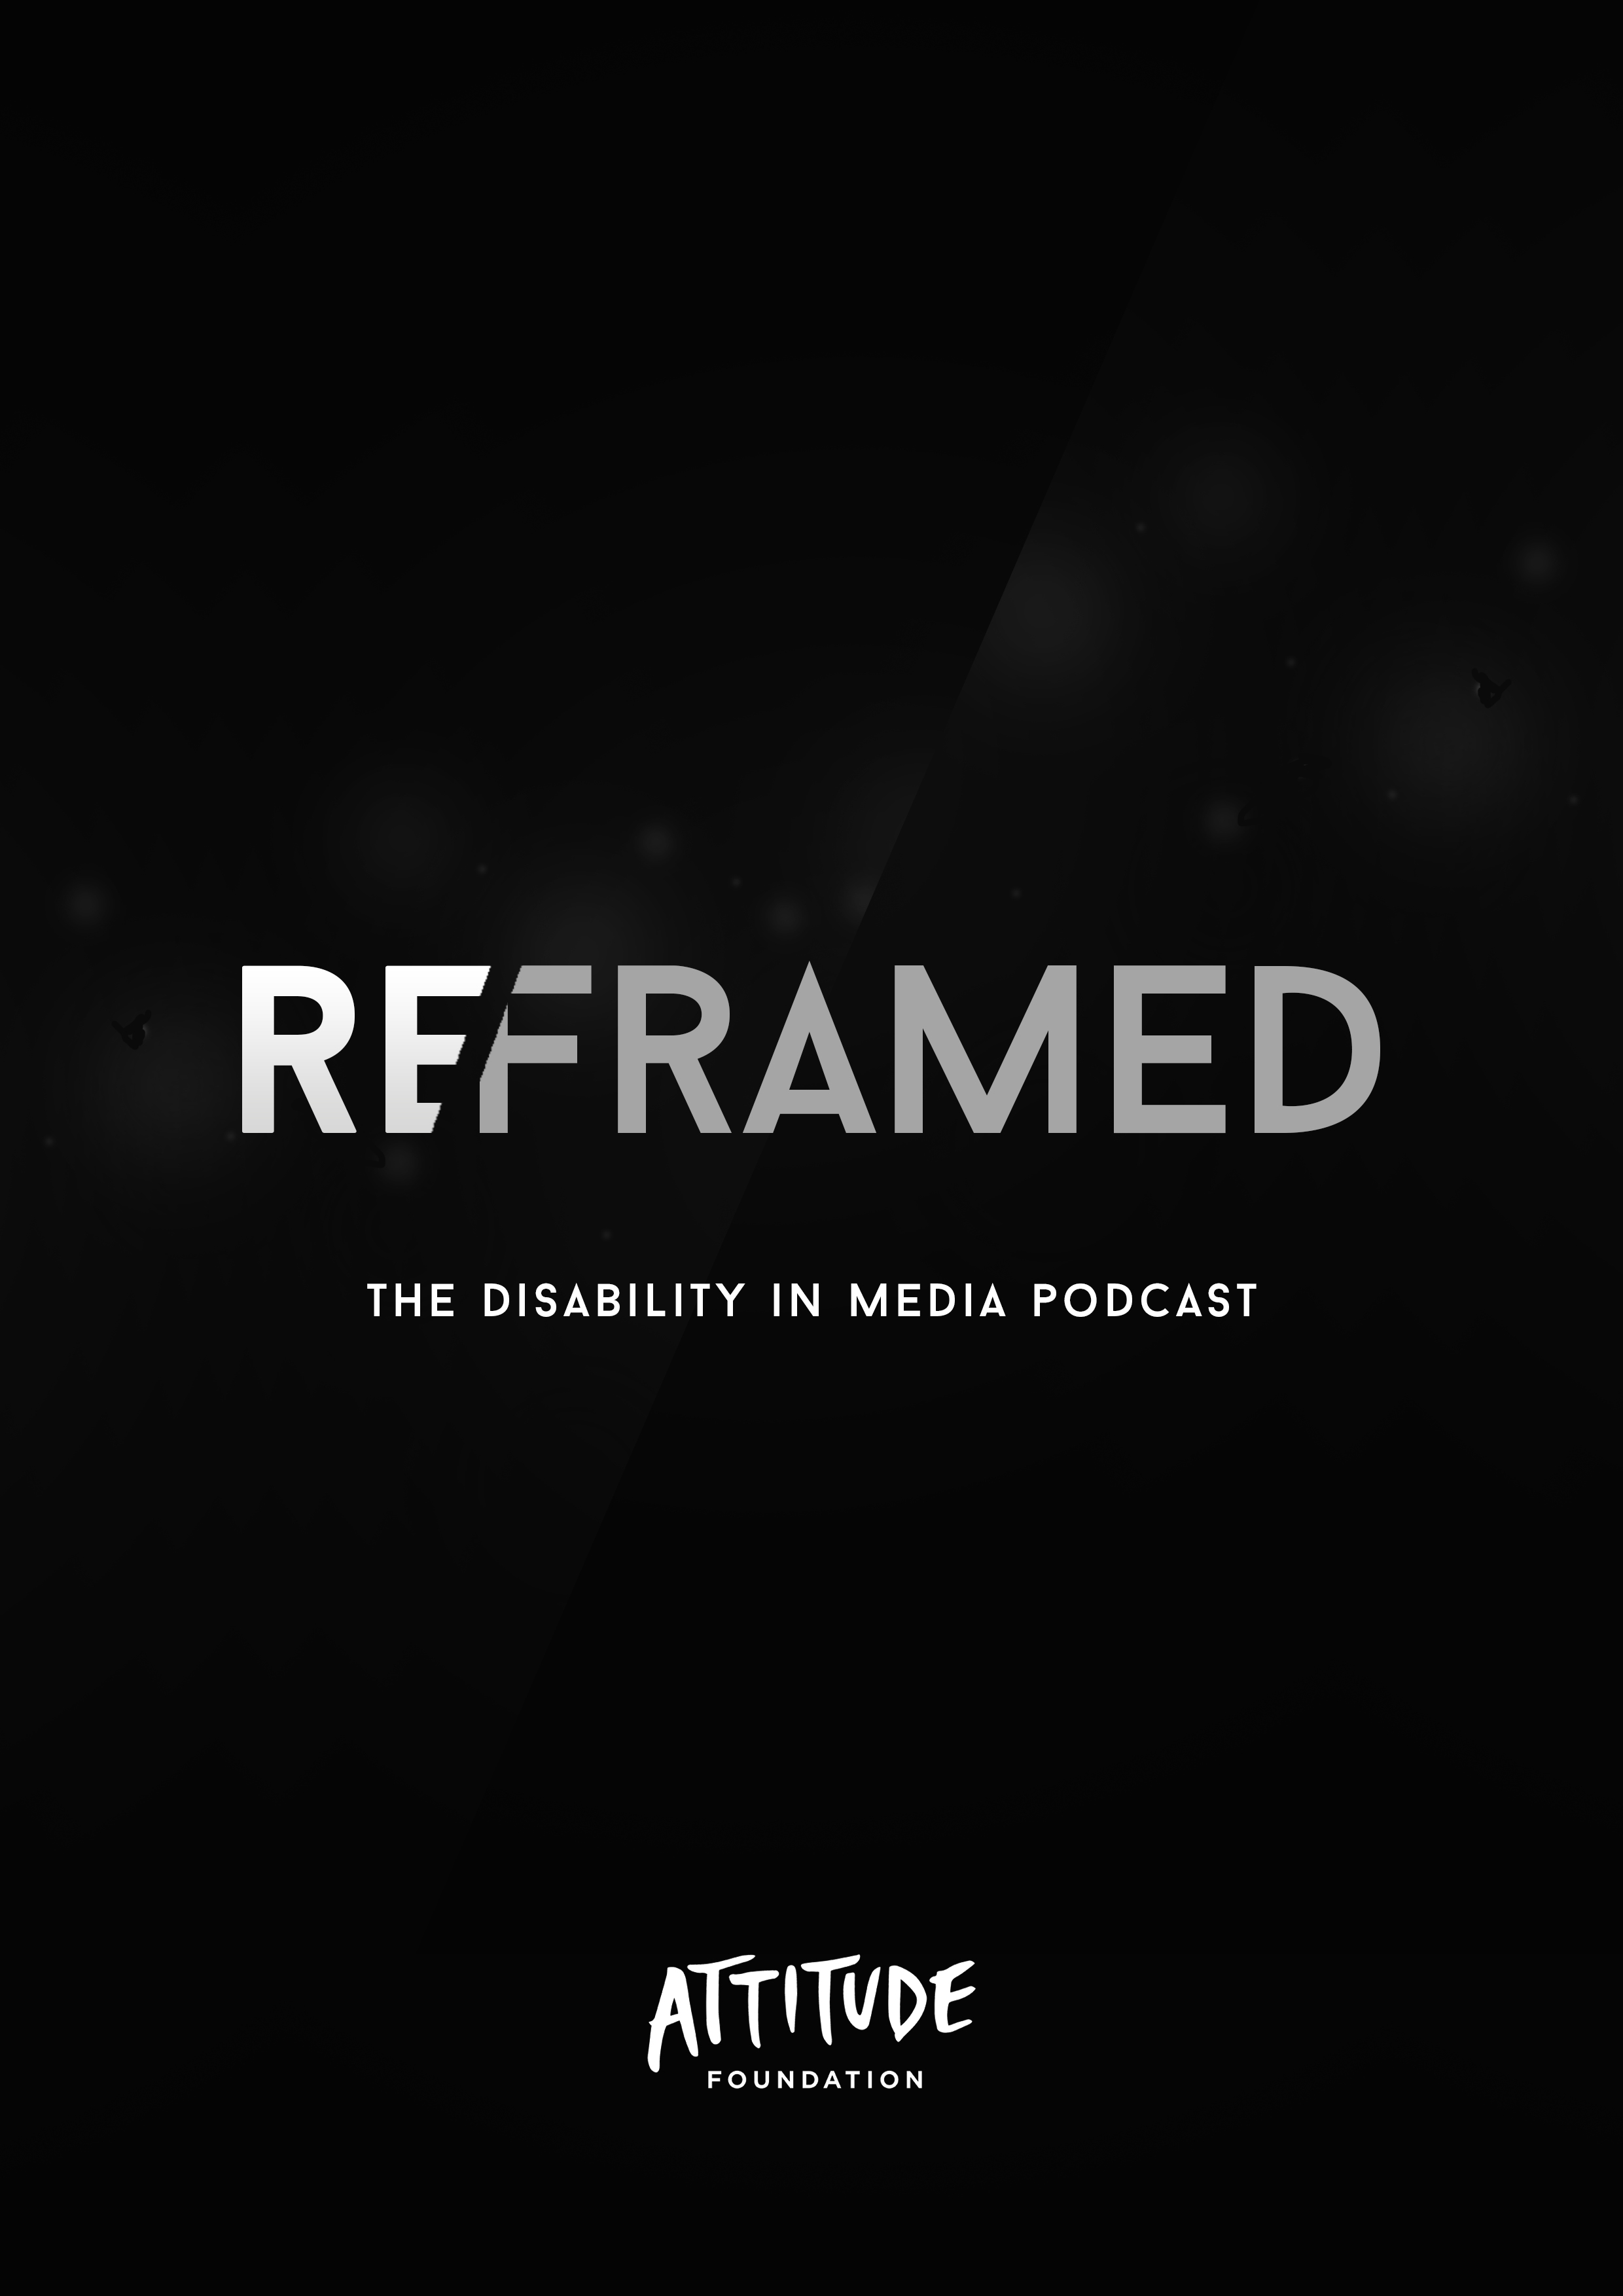 A poster for the Attitude Foundations podcast series ReFramed